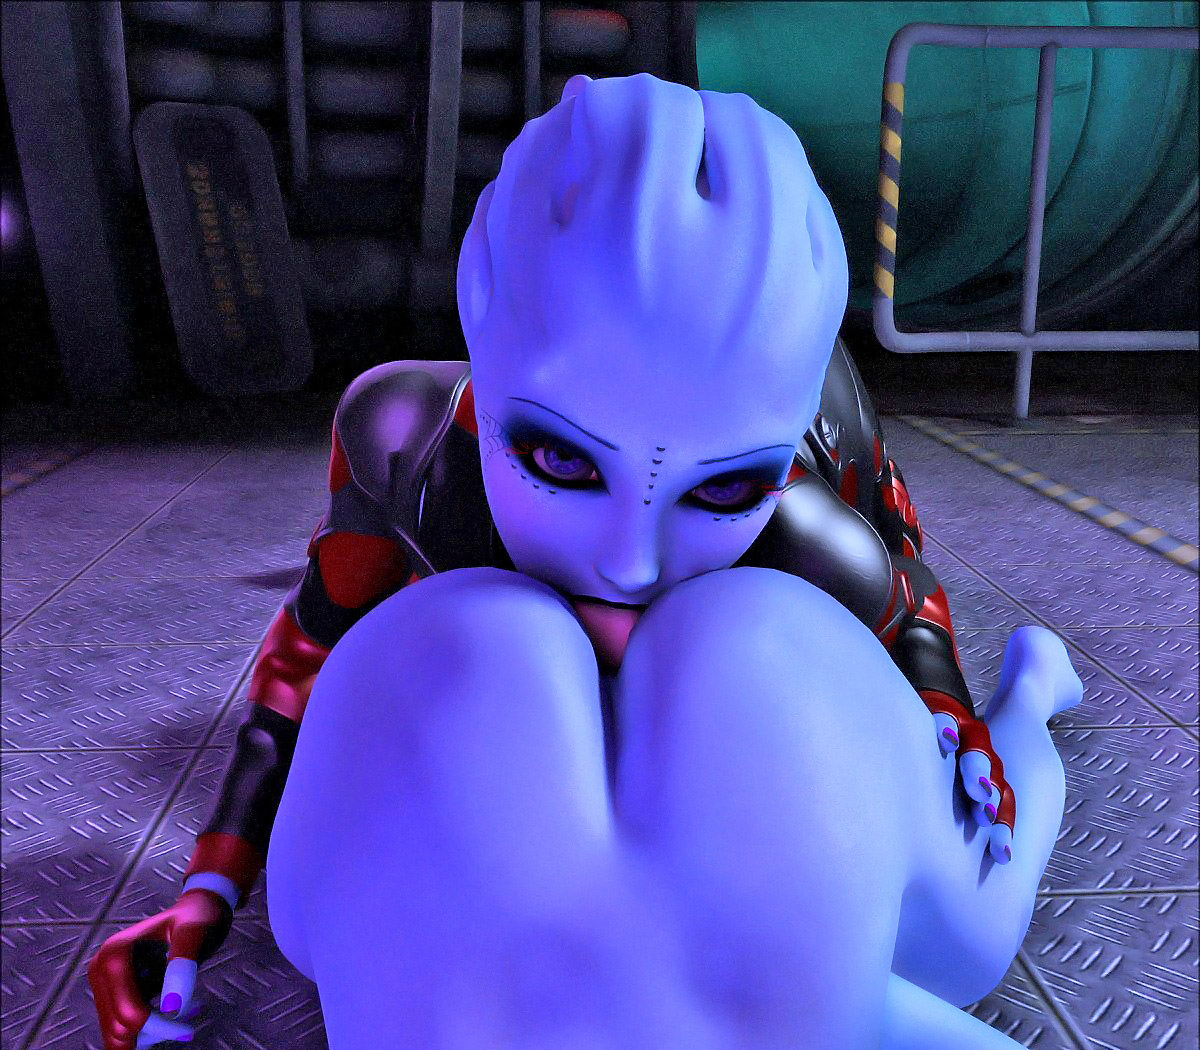 Wonderful blue 3D alien girls licking and fingering each others pussies |  Porncraft 3d